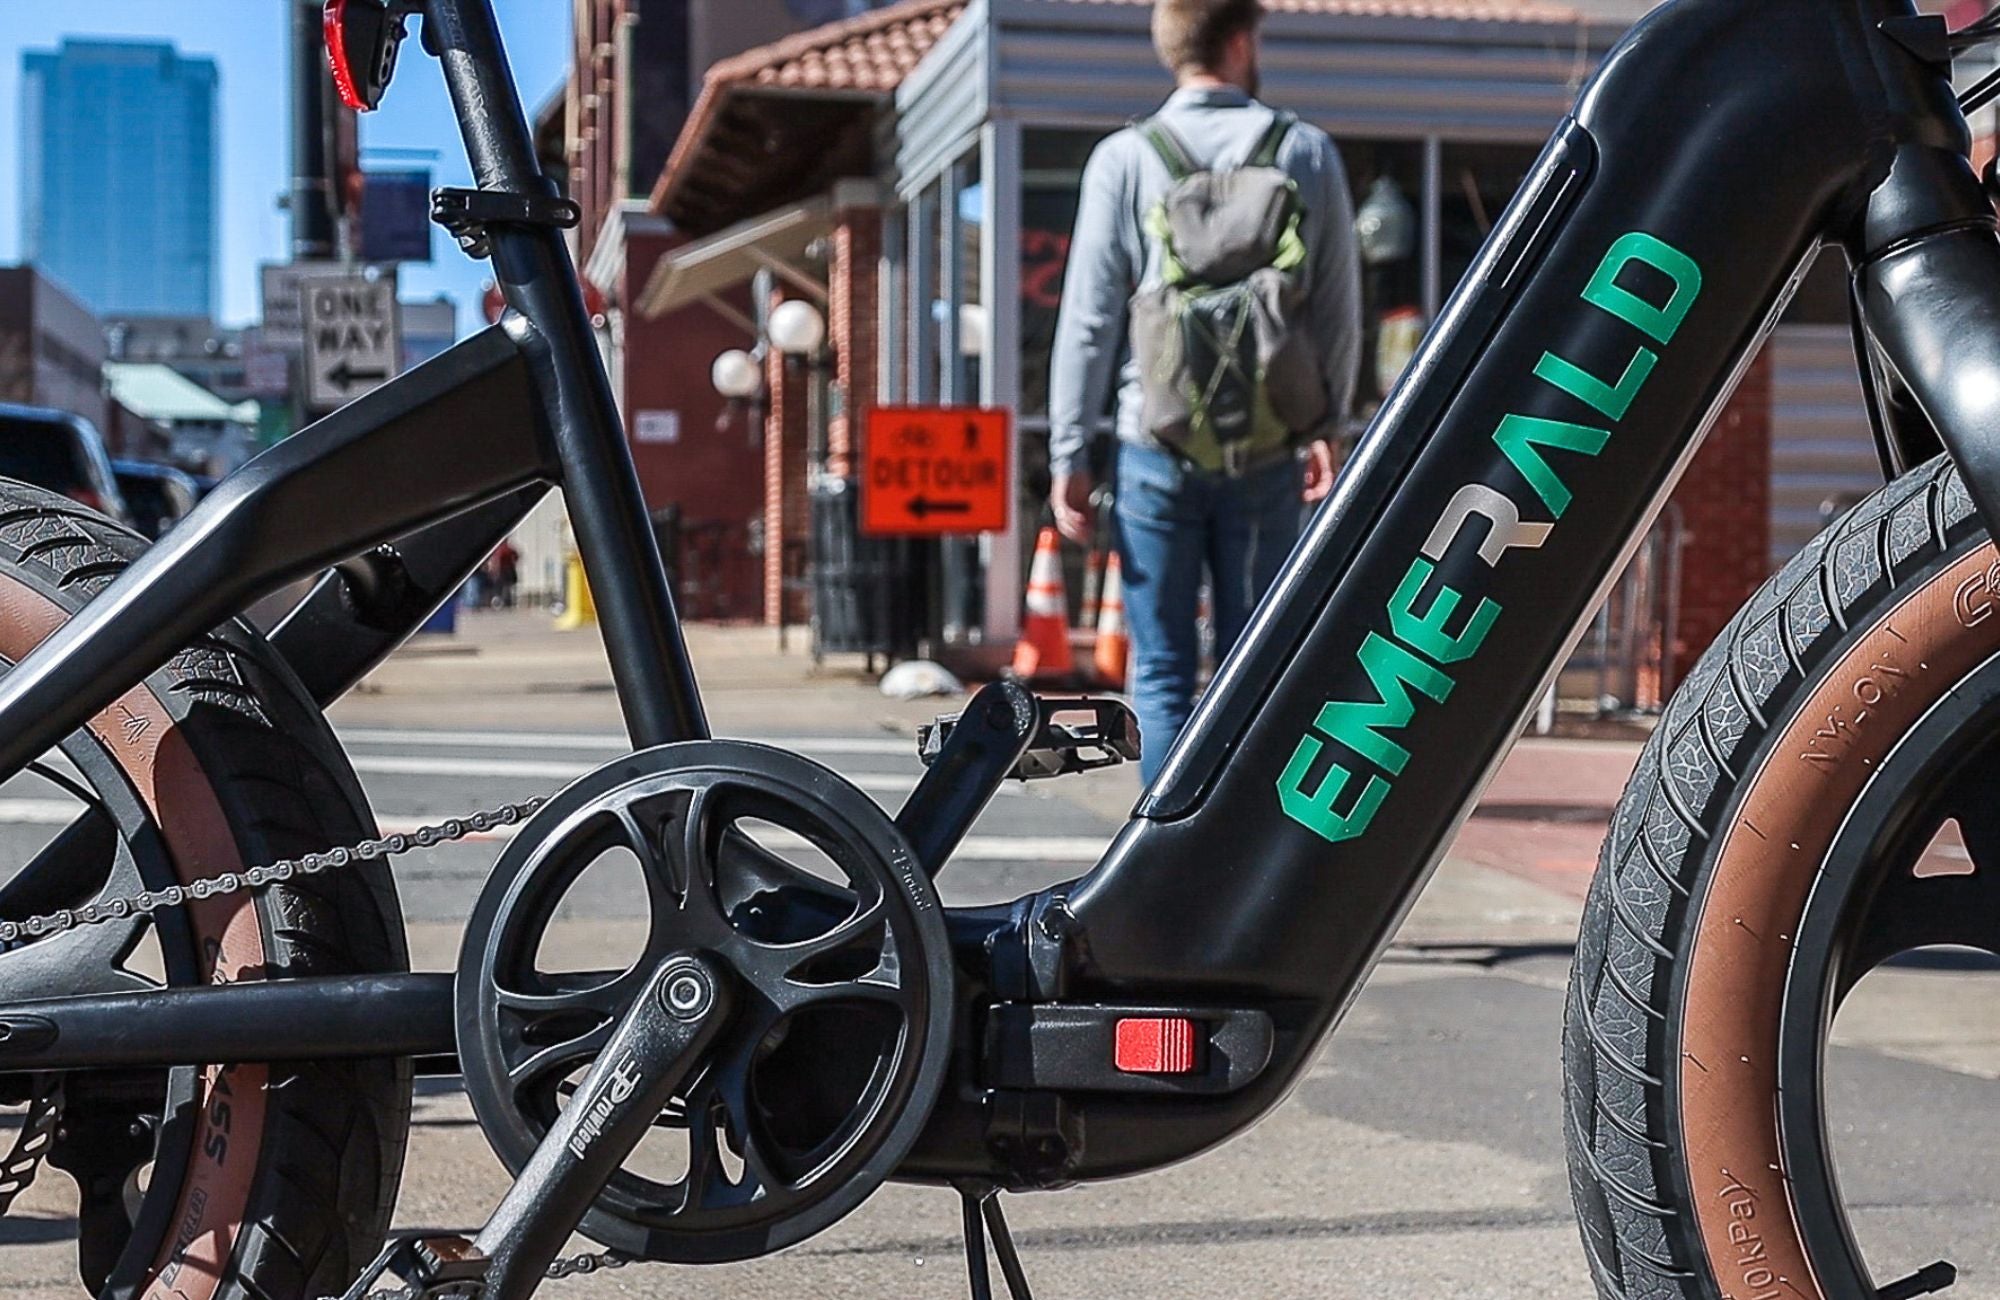 Up close view of Emerald Ebike with pedestrian in the background.